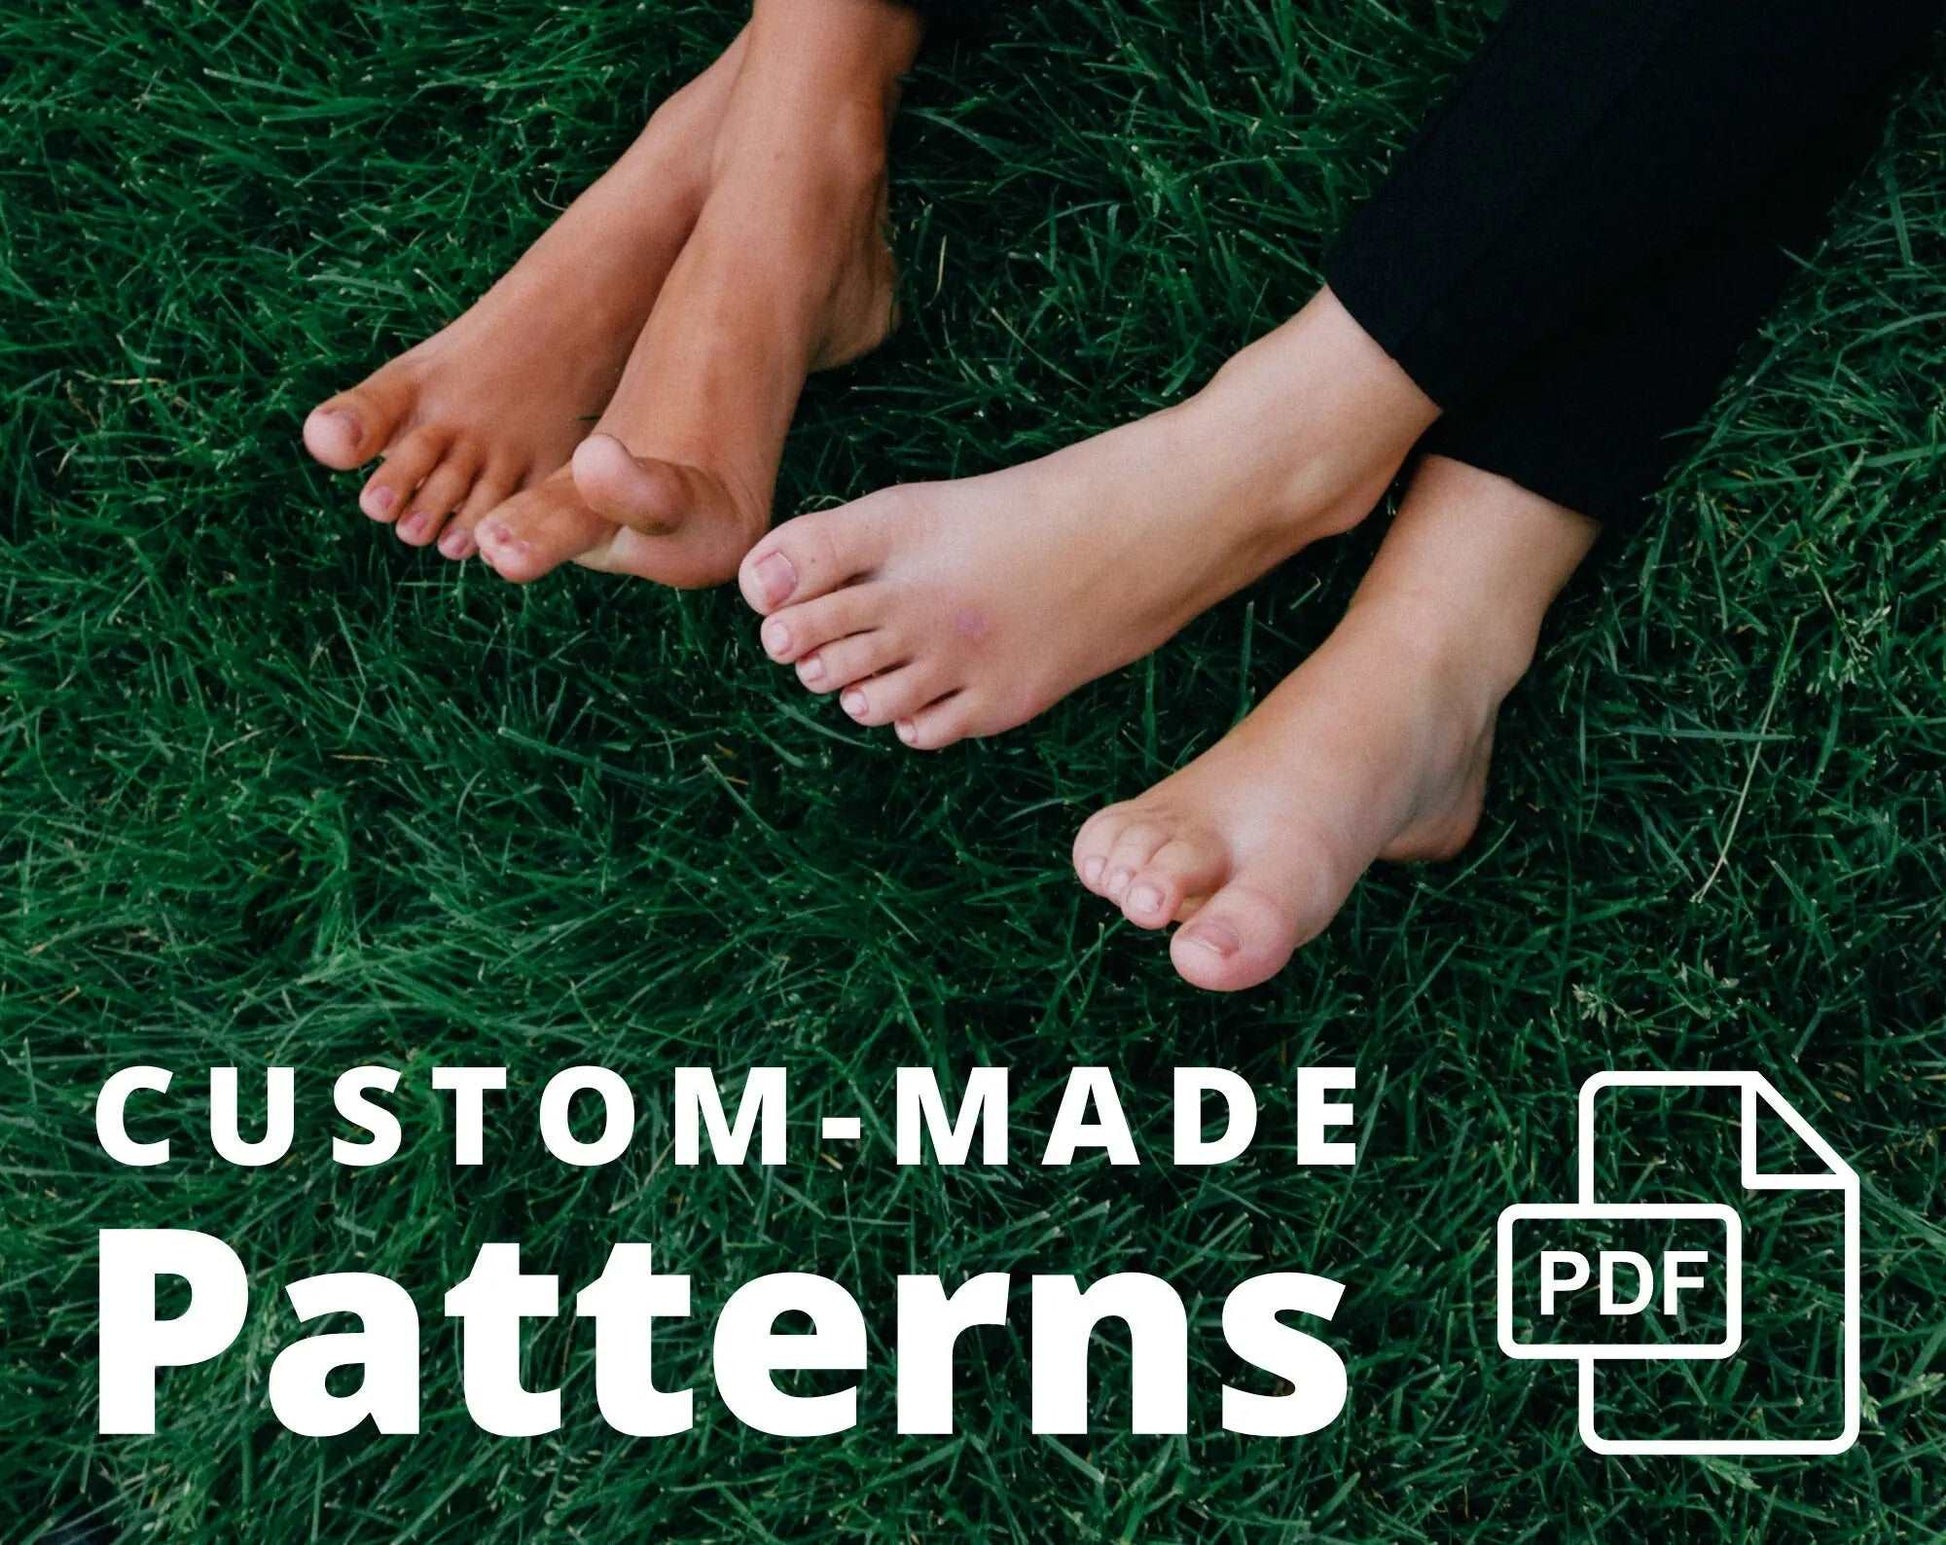 Custom-Made Patterns for Moccasins-Making Earthingmoccasins